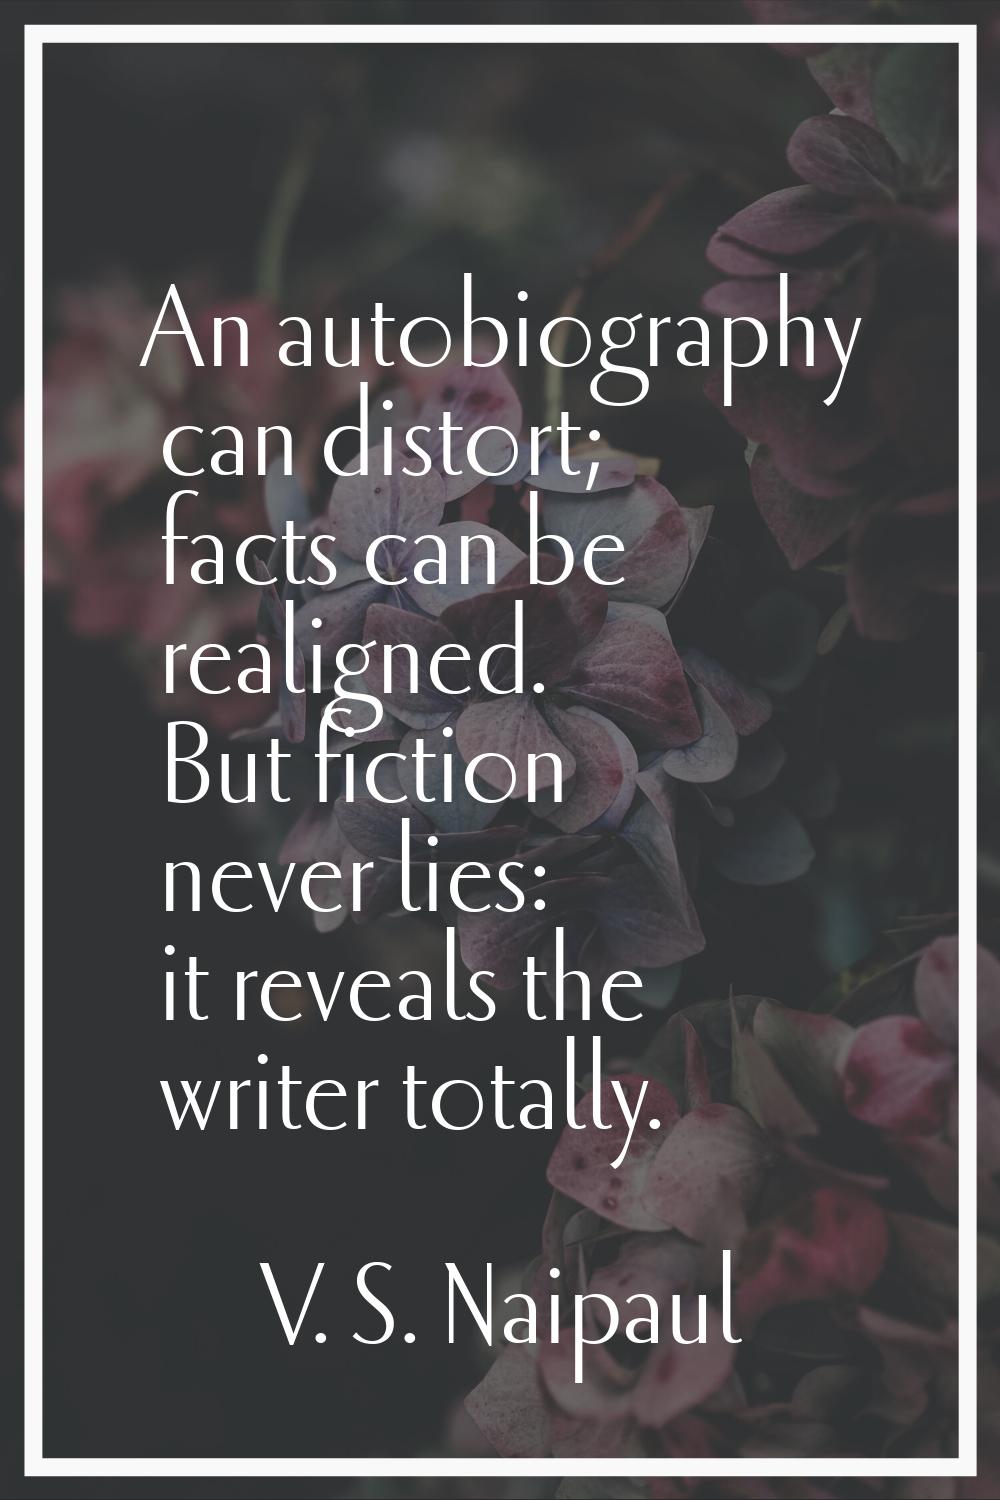 An autobiography can distort; facts can be realigned. But fiction never lies: it reveals the writer